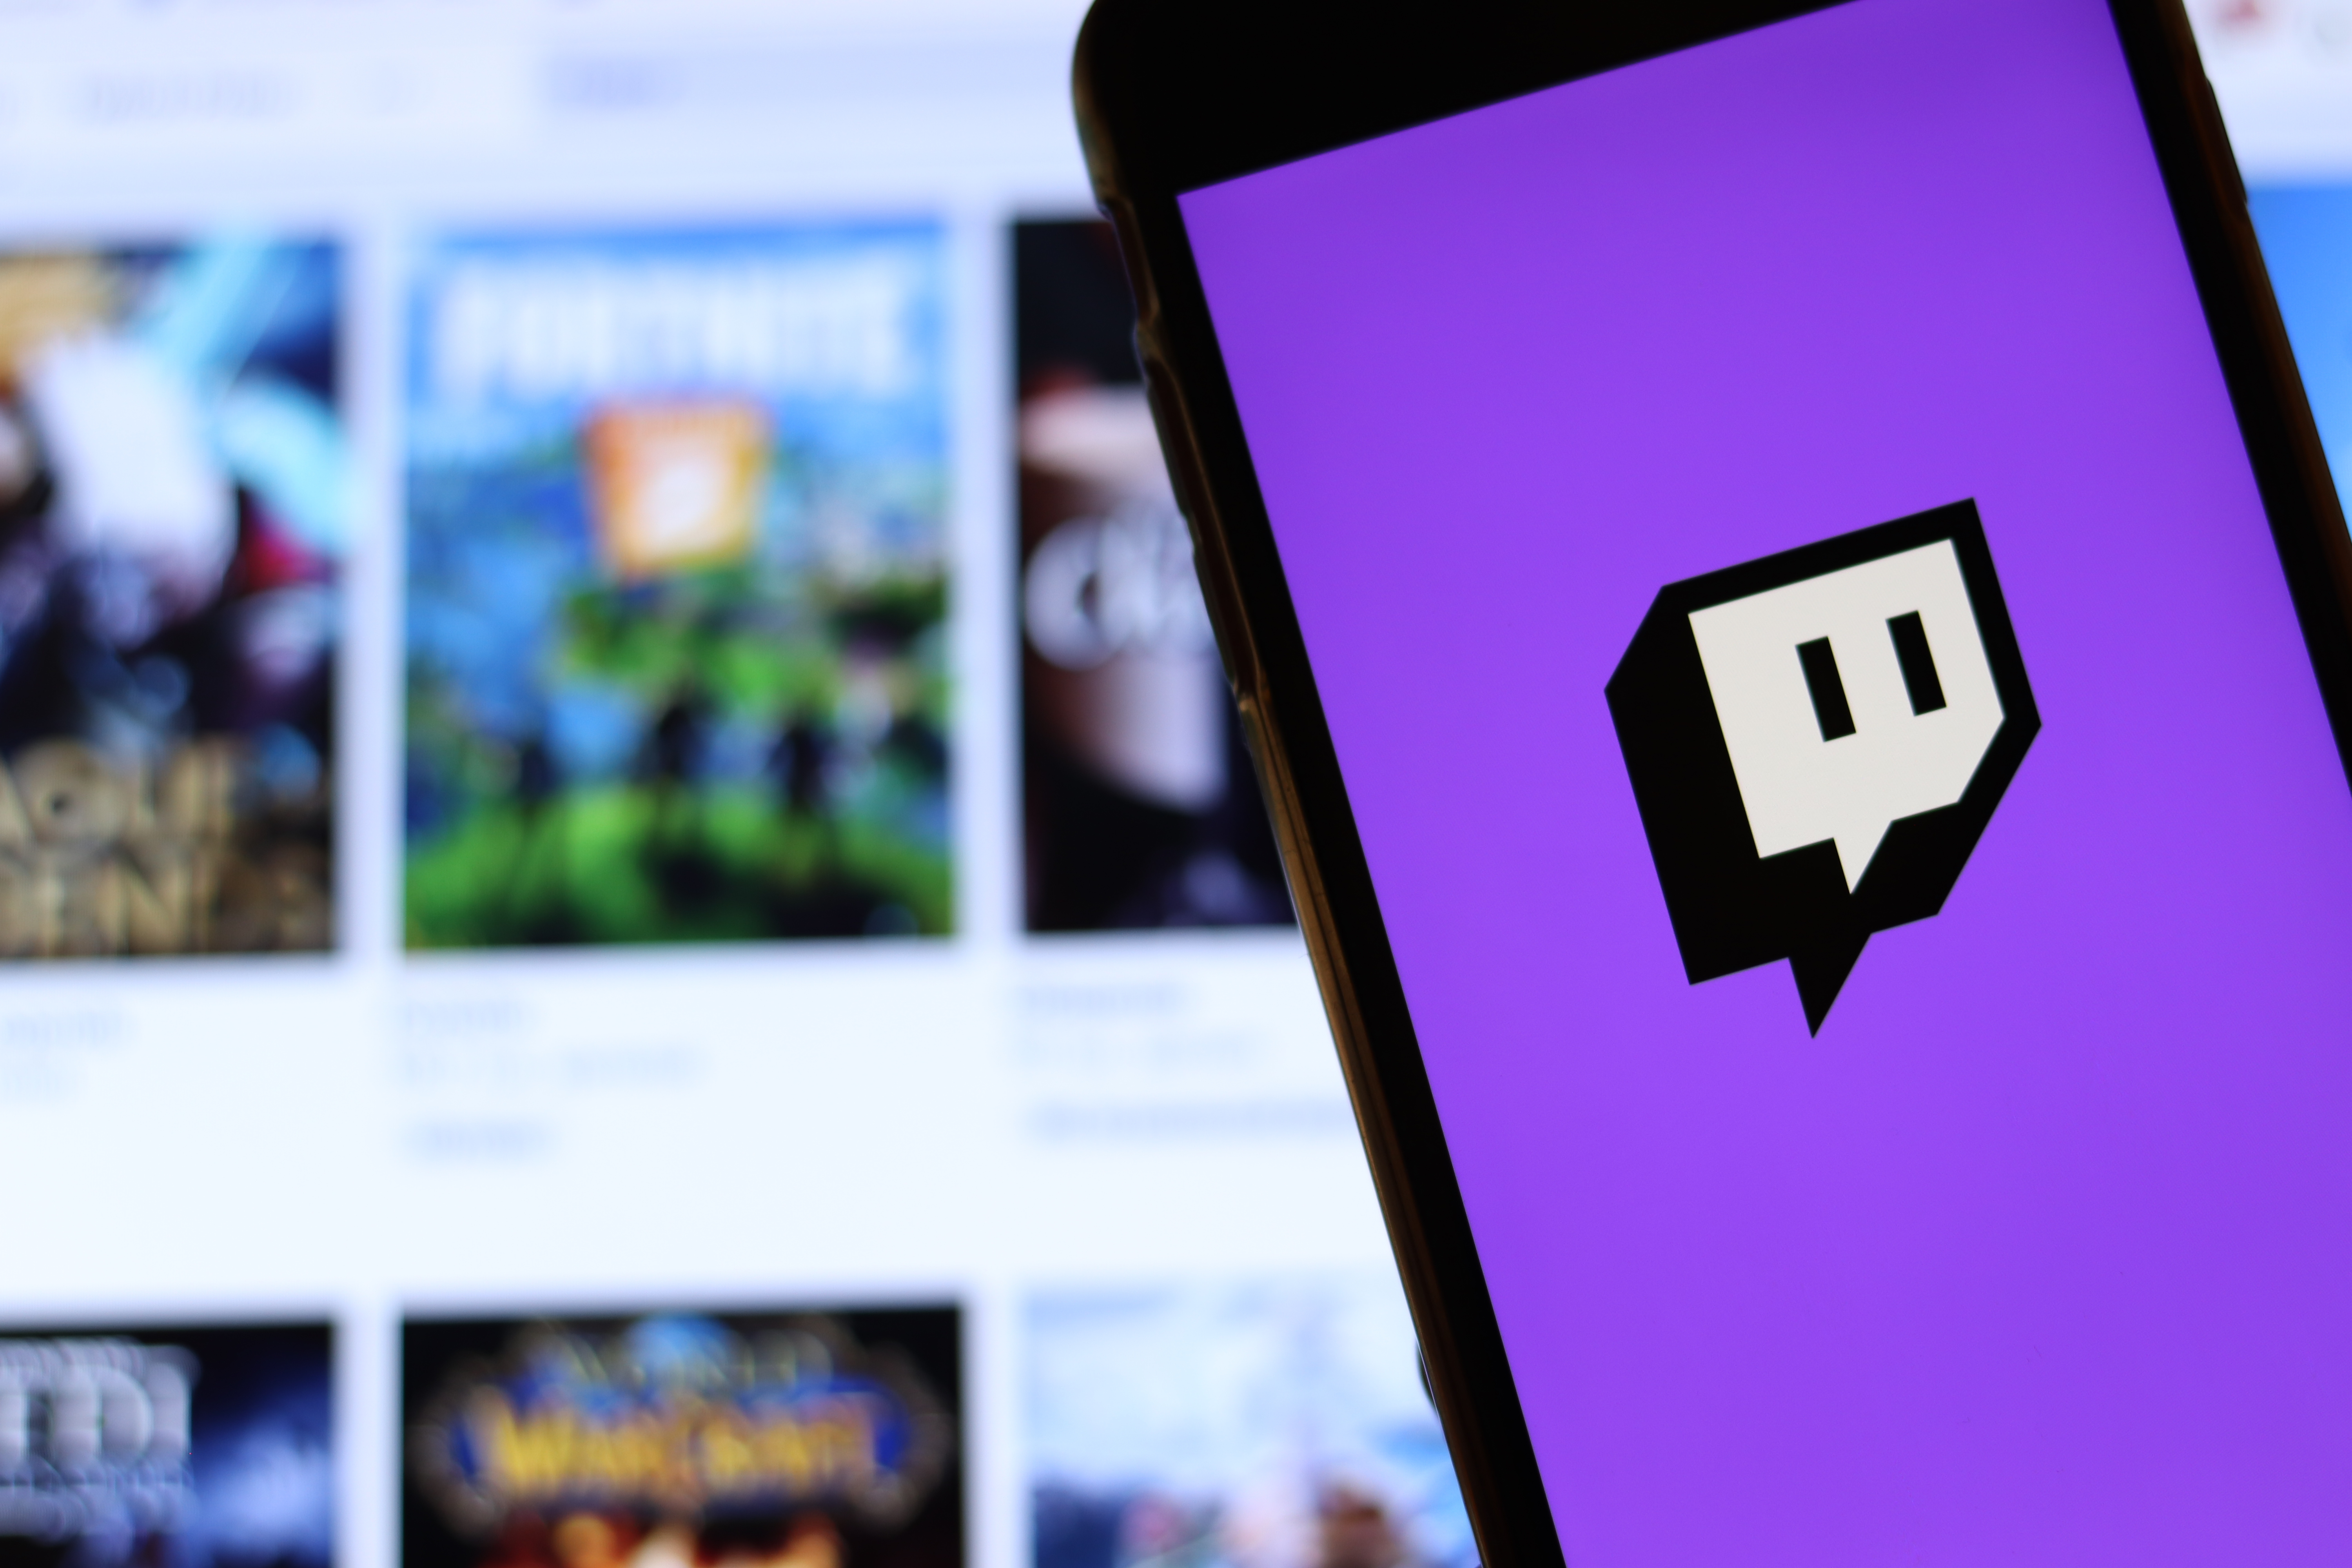 How to see your chat while streaming on twitch